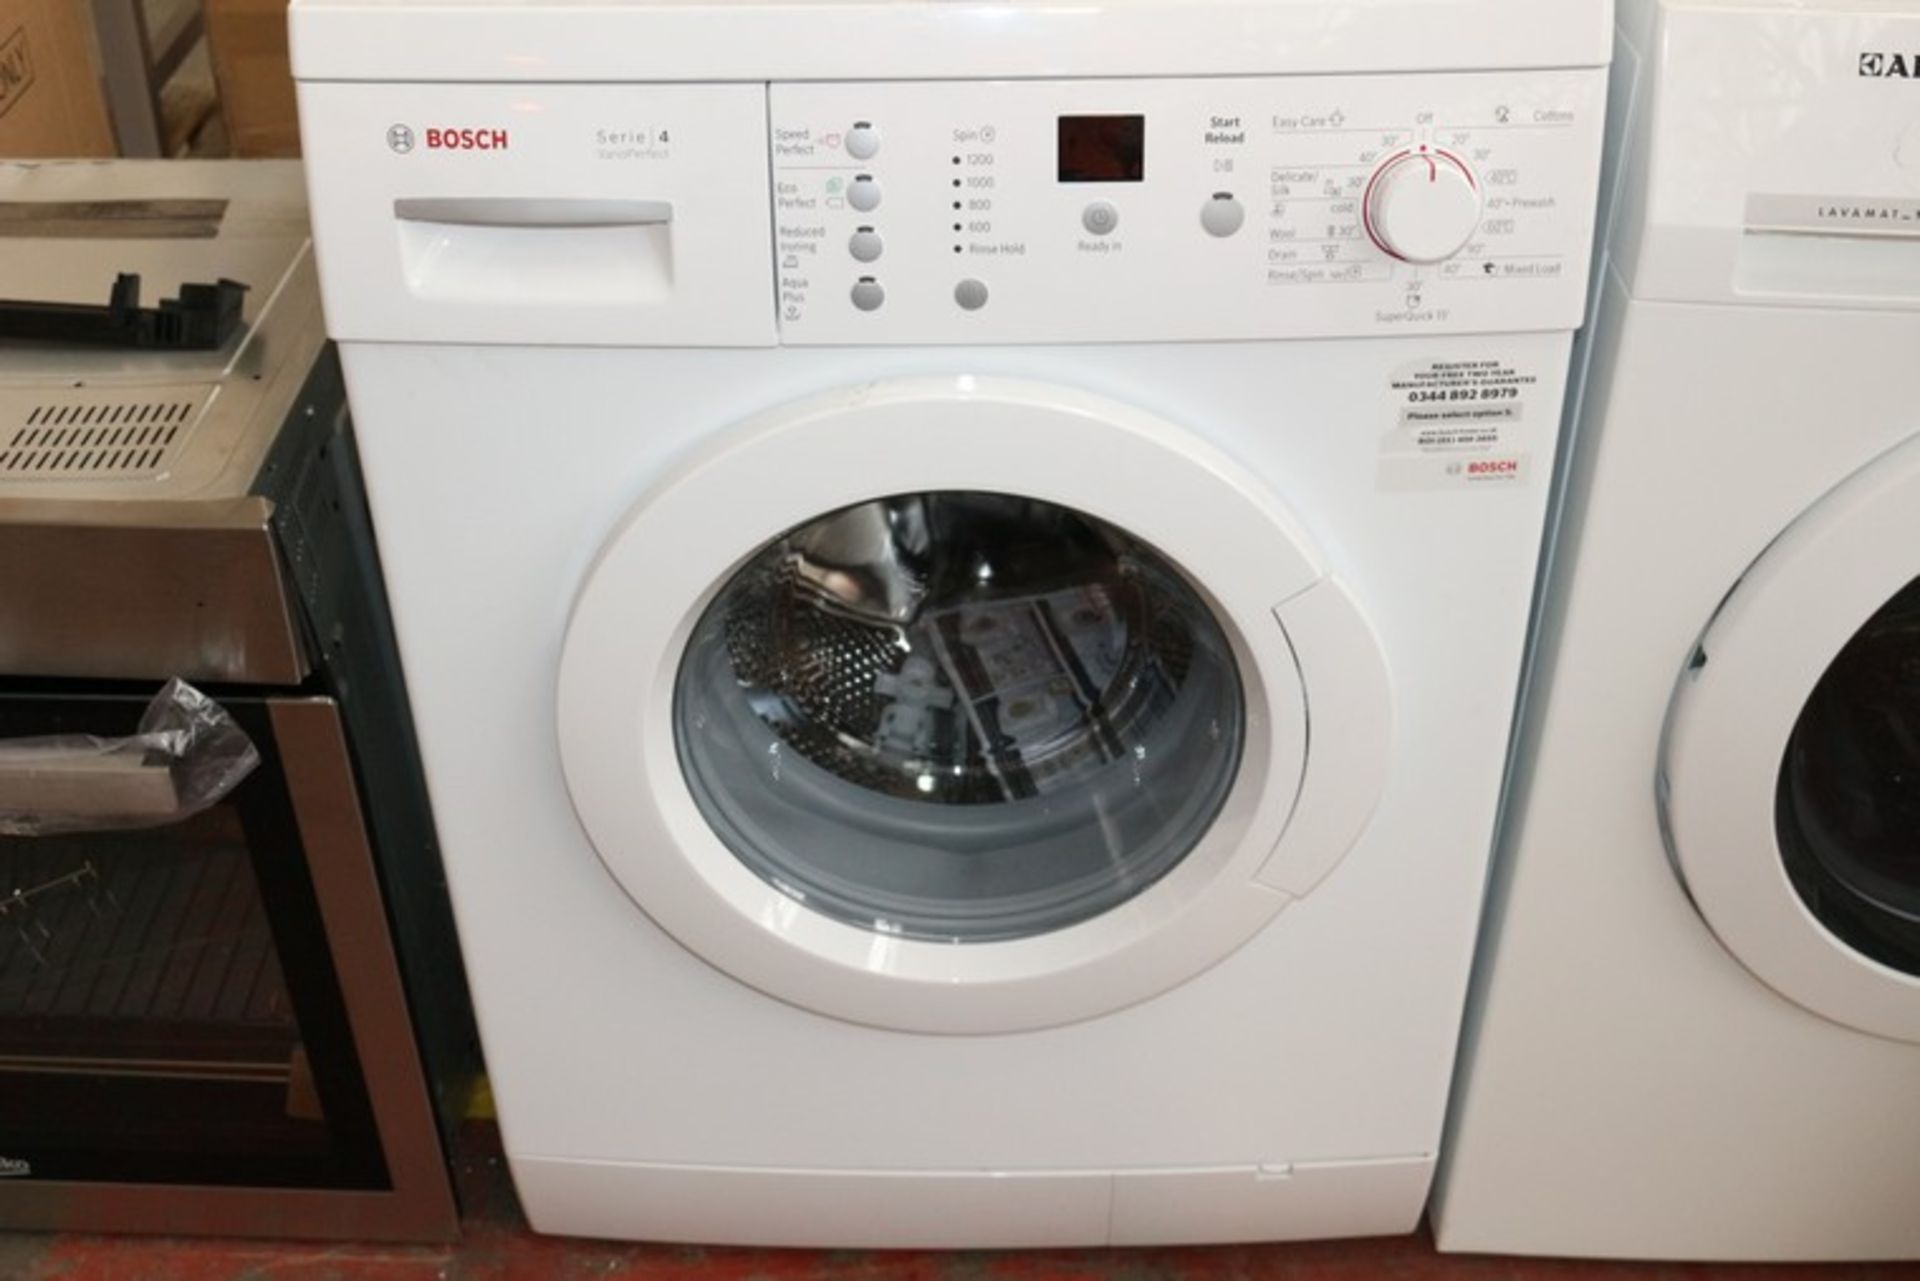 1 x BOSCH SERIES 4 VARIO PERFECT UNDER THE COUNTER WASHING MACHINE IN WHITE (2255129) RRP £330 (24.